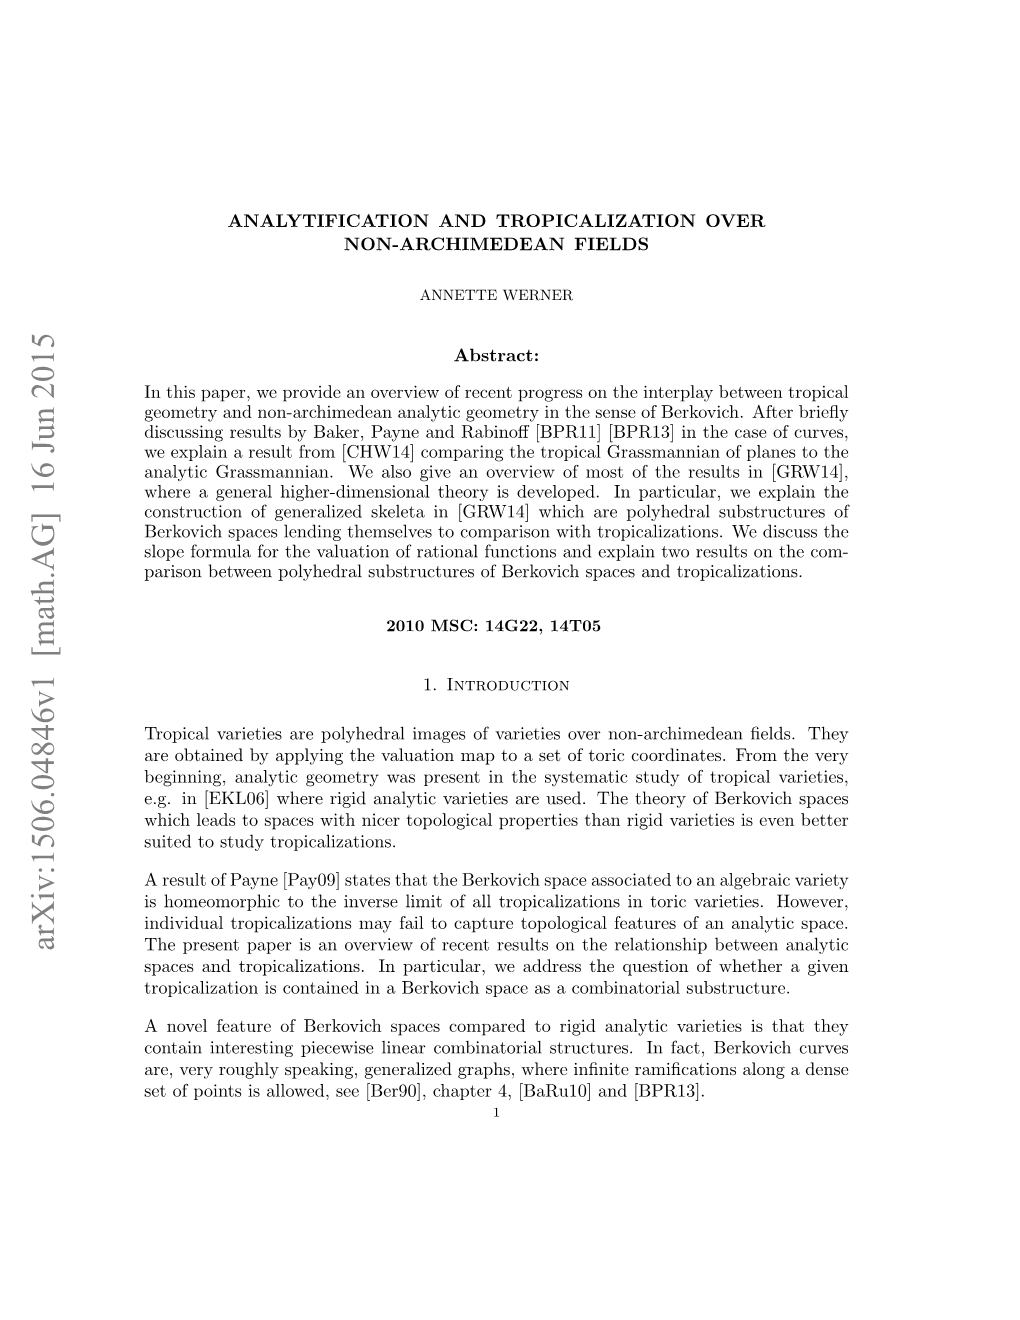 Analytification and Tropicalization Over Non-Archimedean Fields